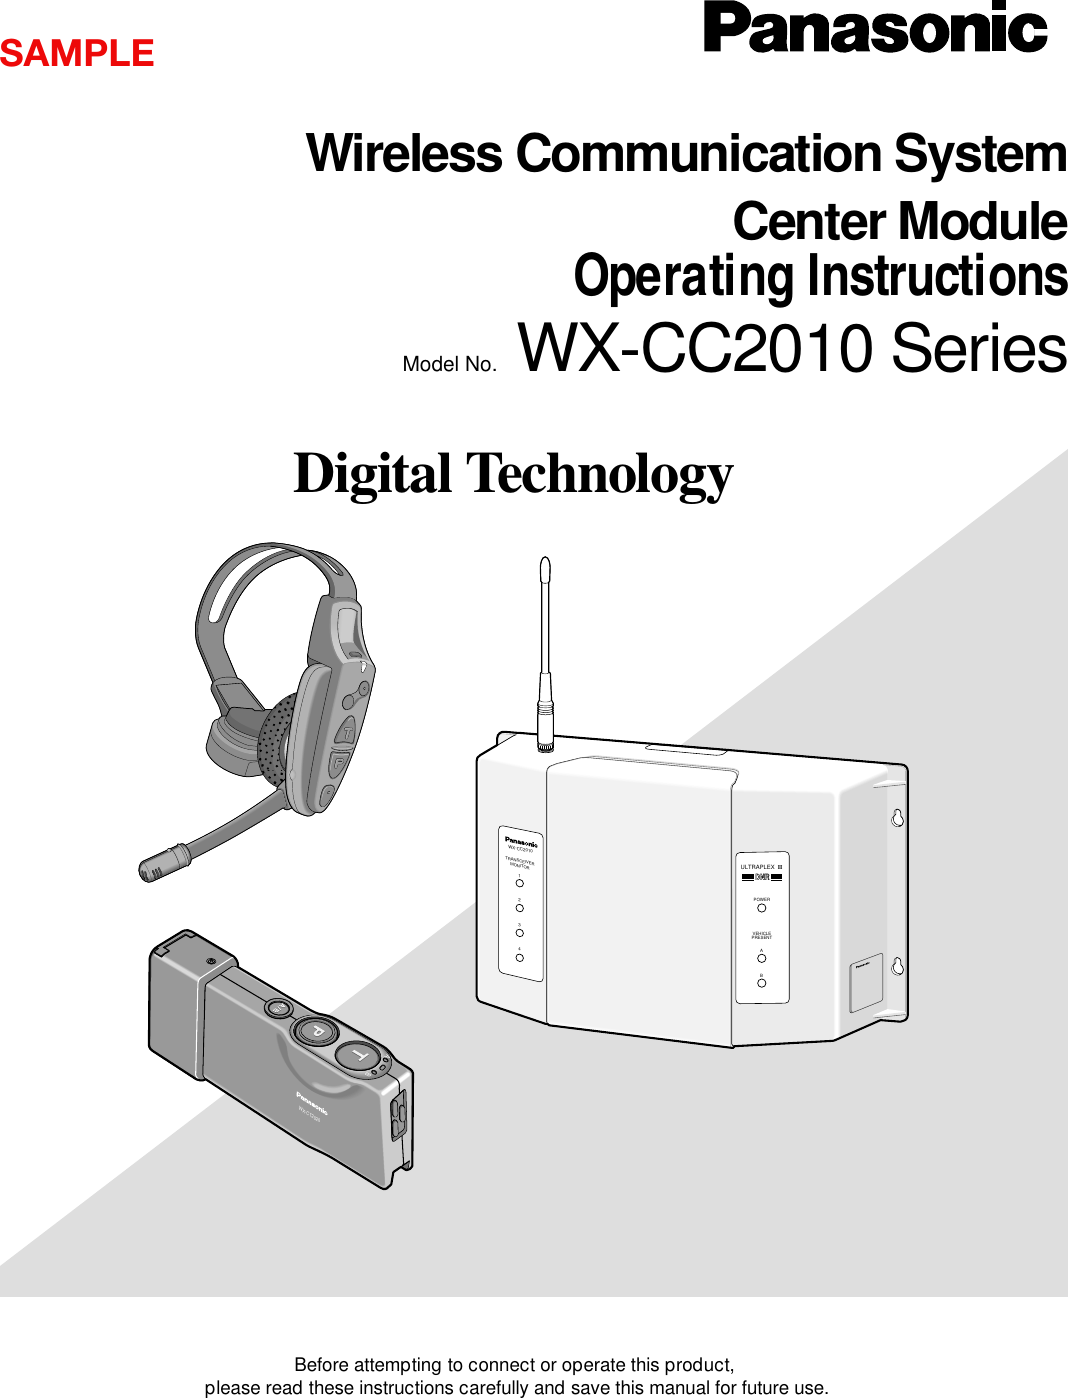 Before attempting to connect or operate this product,please read these instructions carefully and save this manual for future use.Model No. WX-CC2010 SeriesWireless Communication SystemCenter ModuleOperating InstructionsDigital TechnologyWX-CC2010TRANSCEIVERMONITOR1234ULTRAPLEX  IIPOWERVEHICLEPRESENTDNRDNRABABWX-CT2020SAMPLE